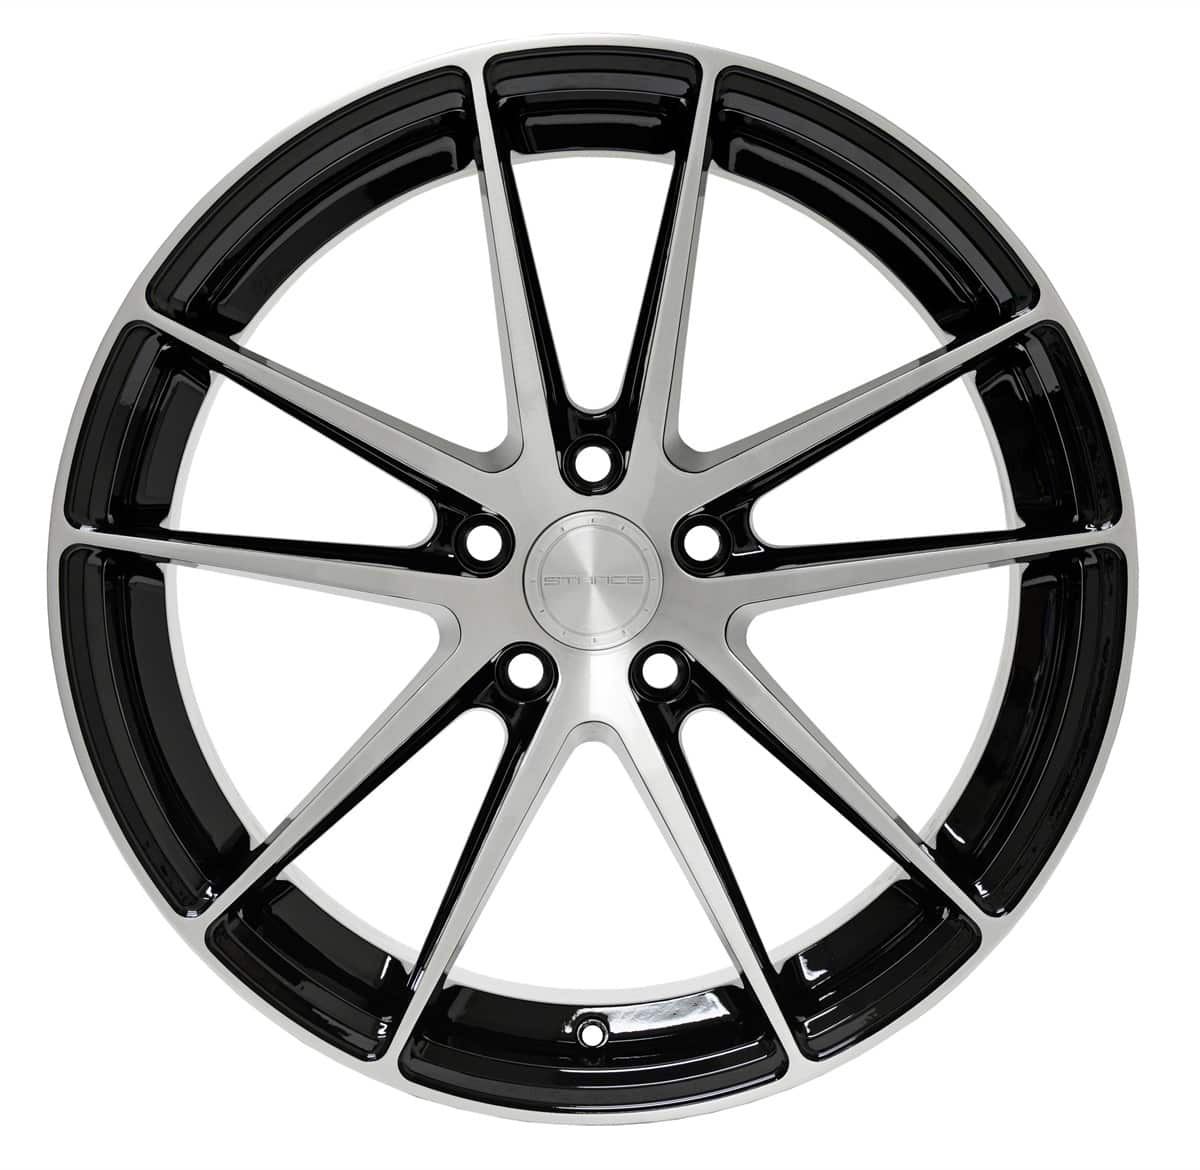 STANCE-SC1-MACHINED-FACE-GLOSS-BLACK-BARREL-CONCAVE-WHEELS.jpg